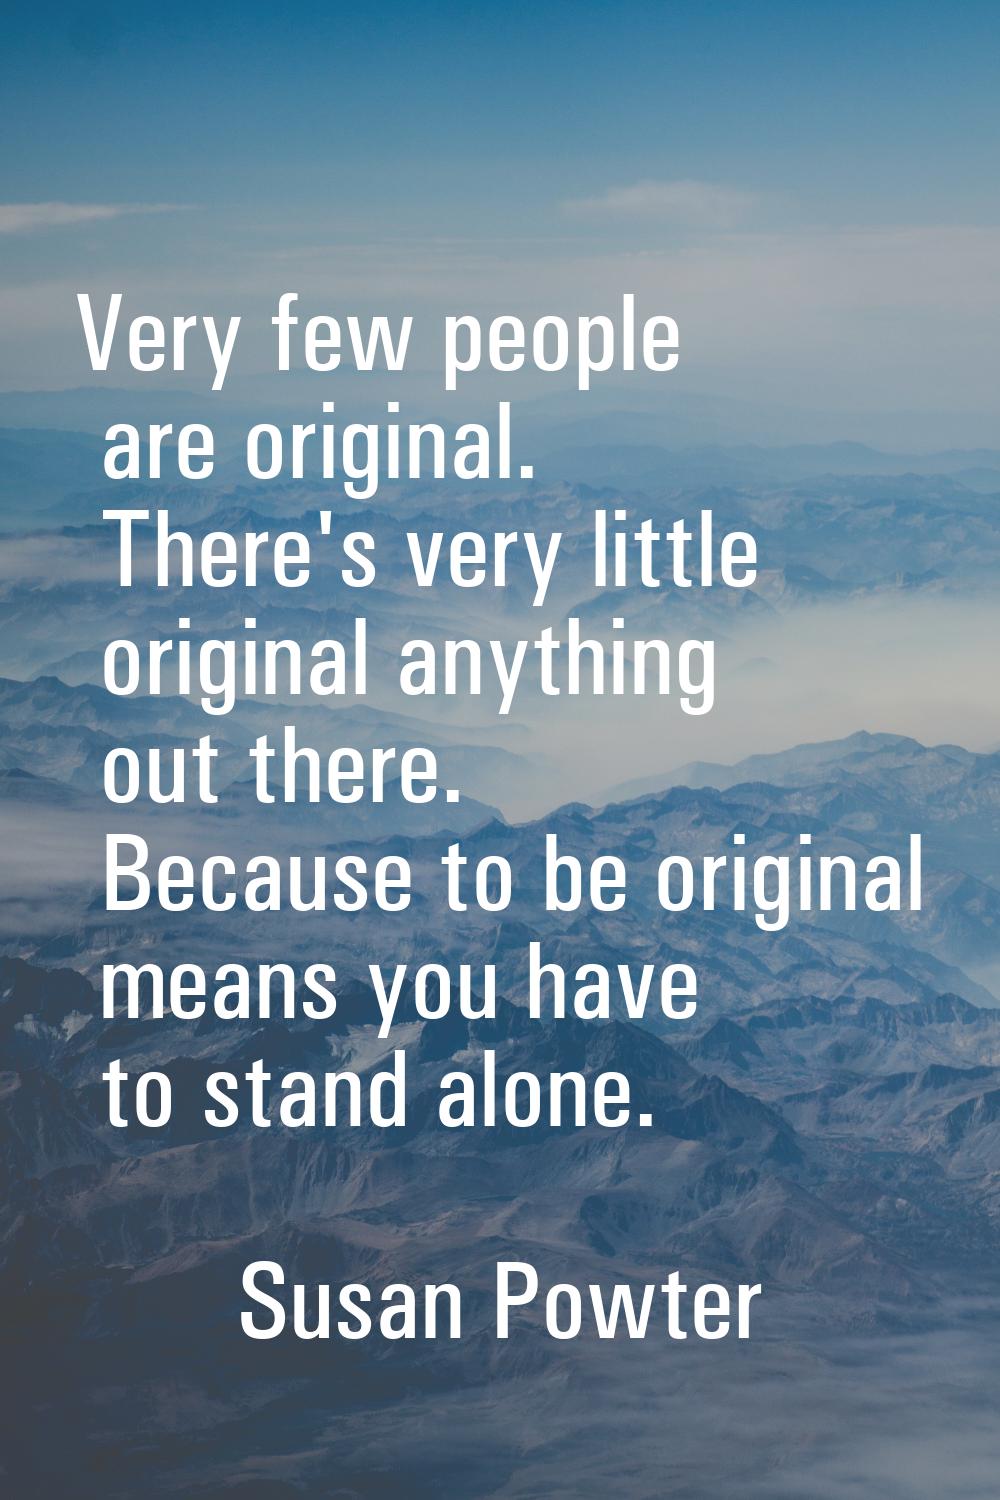 Very few people are original. There's very little original anything out there. Because to be origin